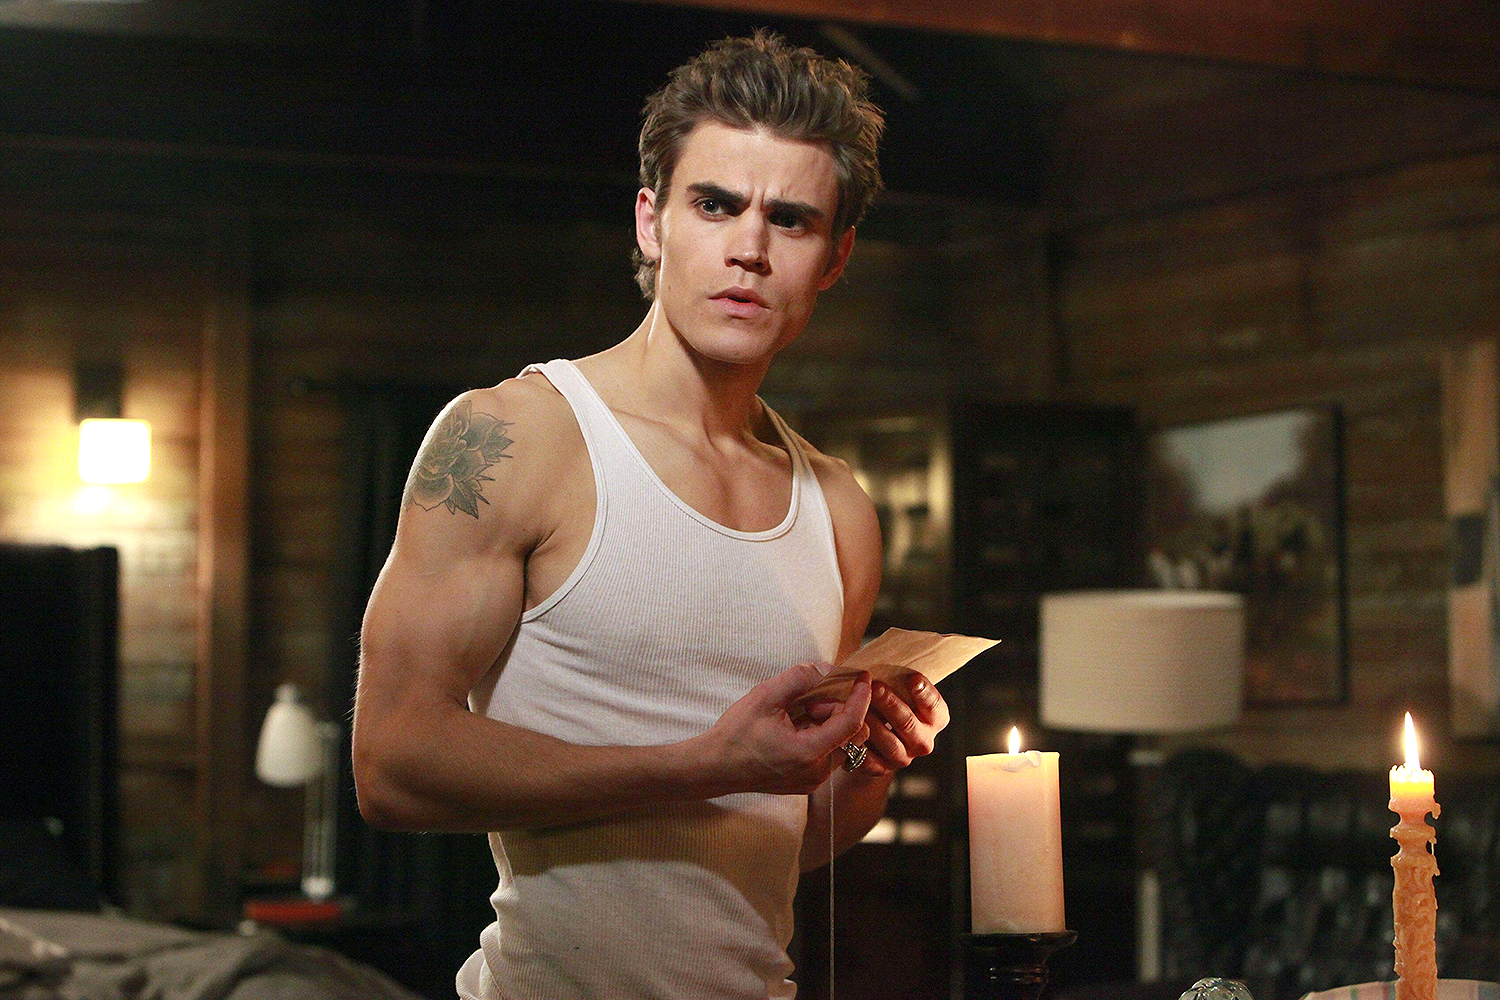 Paul Wesley is saying he doesn't miss the Vampire Diaries